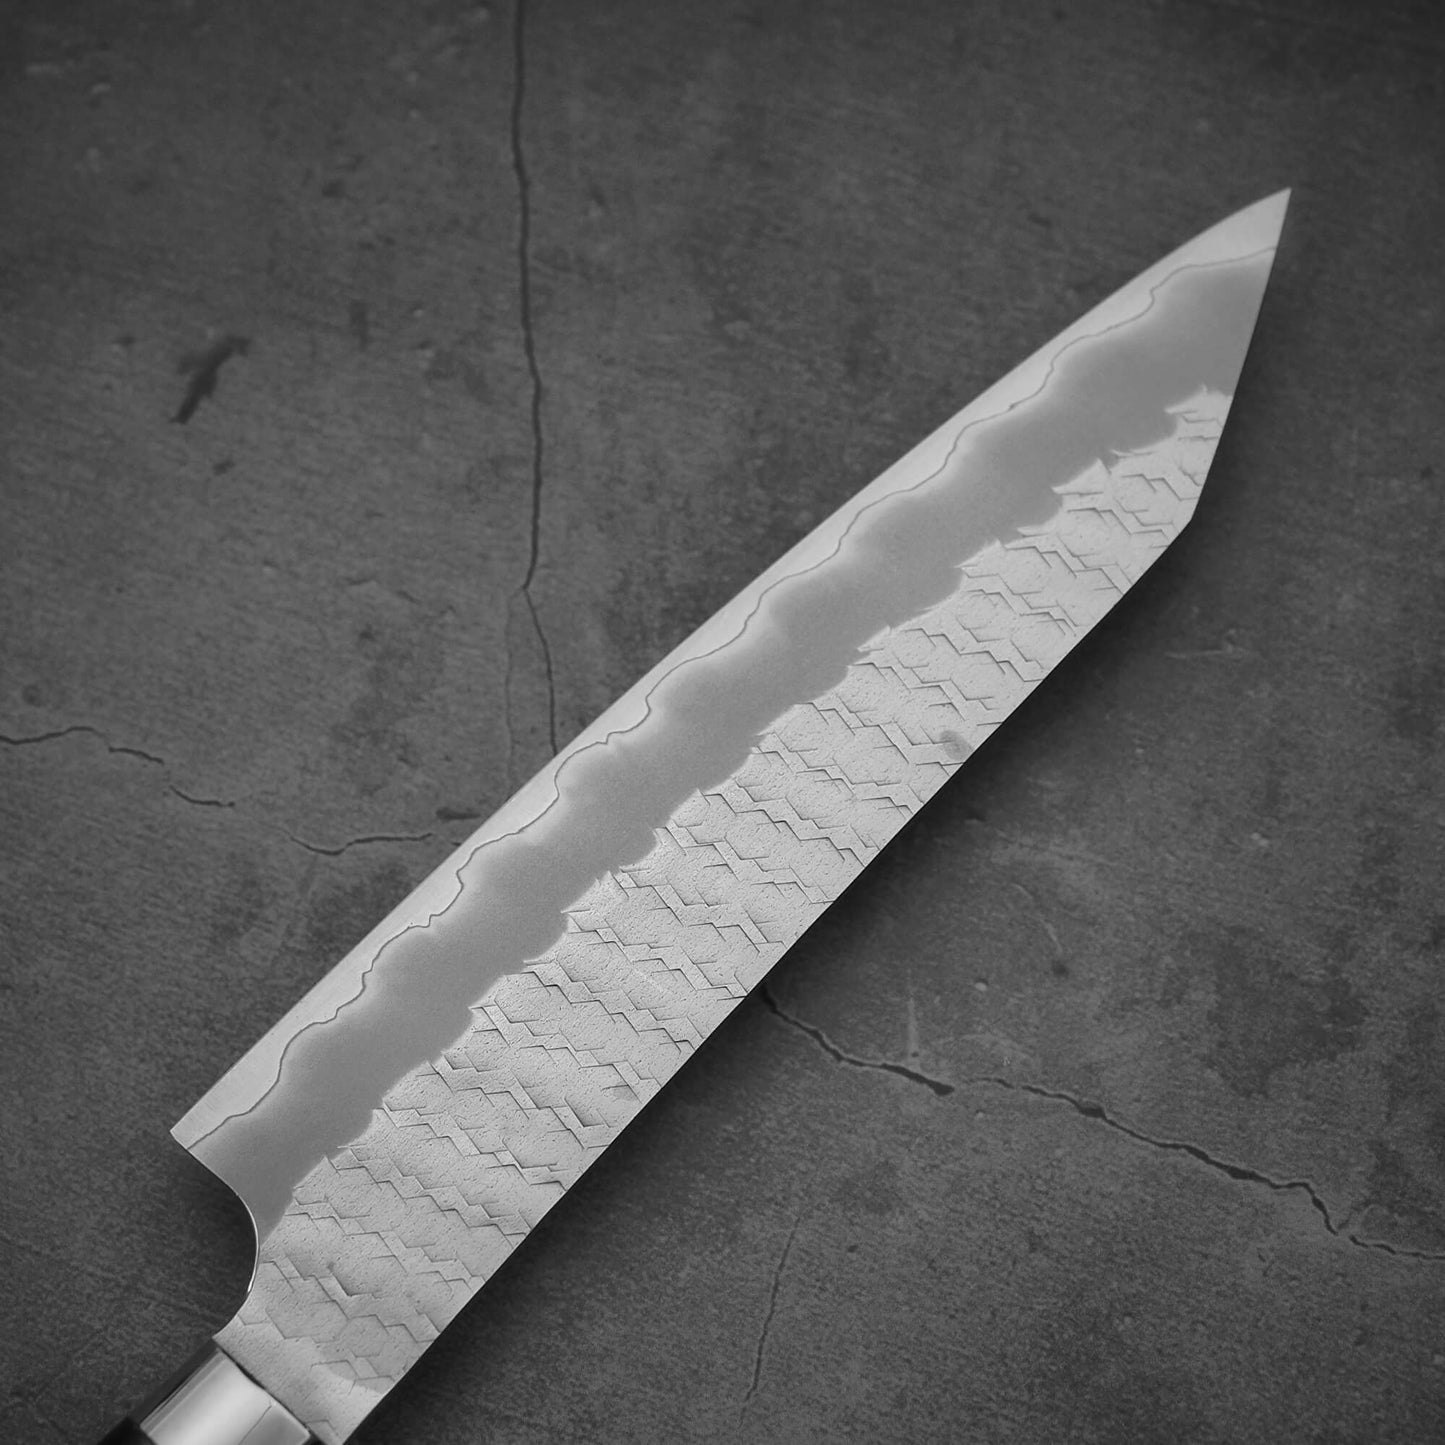 Top view of the blade of Nigara tsuchime SG2 kiritsuke petty knife 150mm on the other side